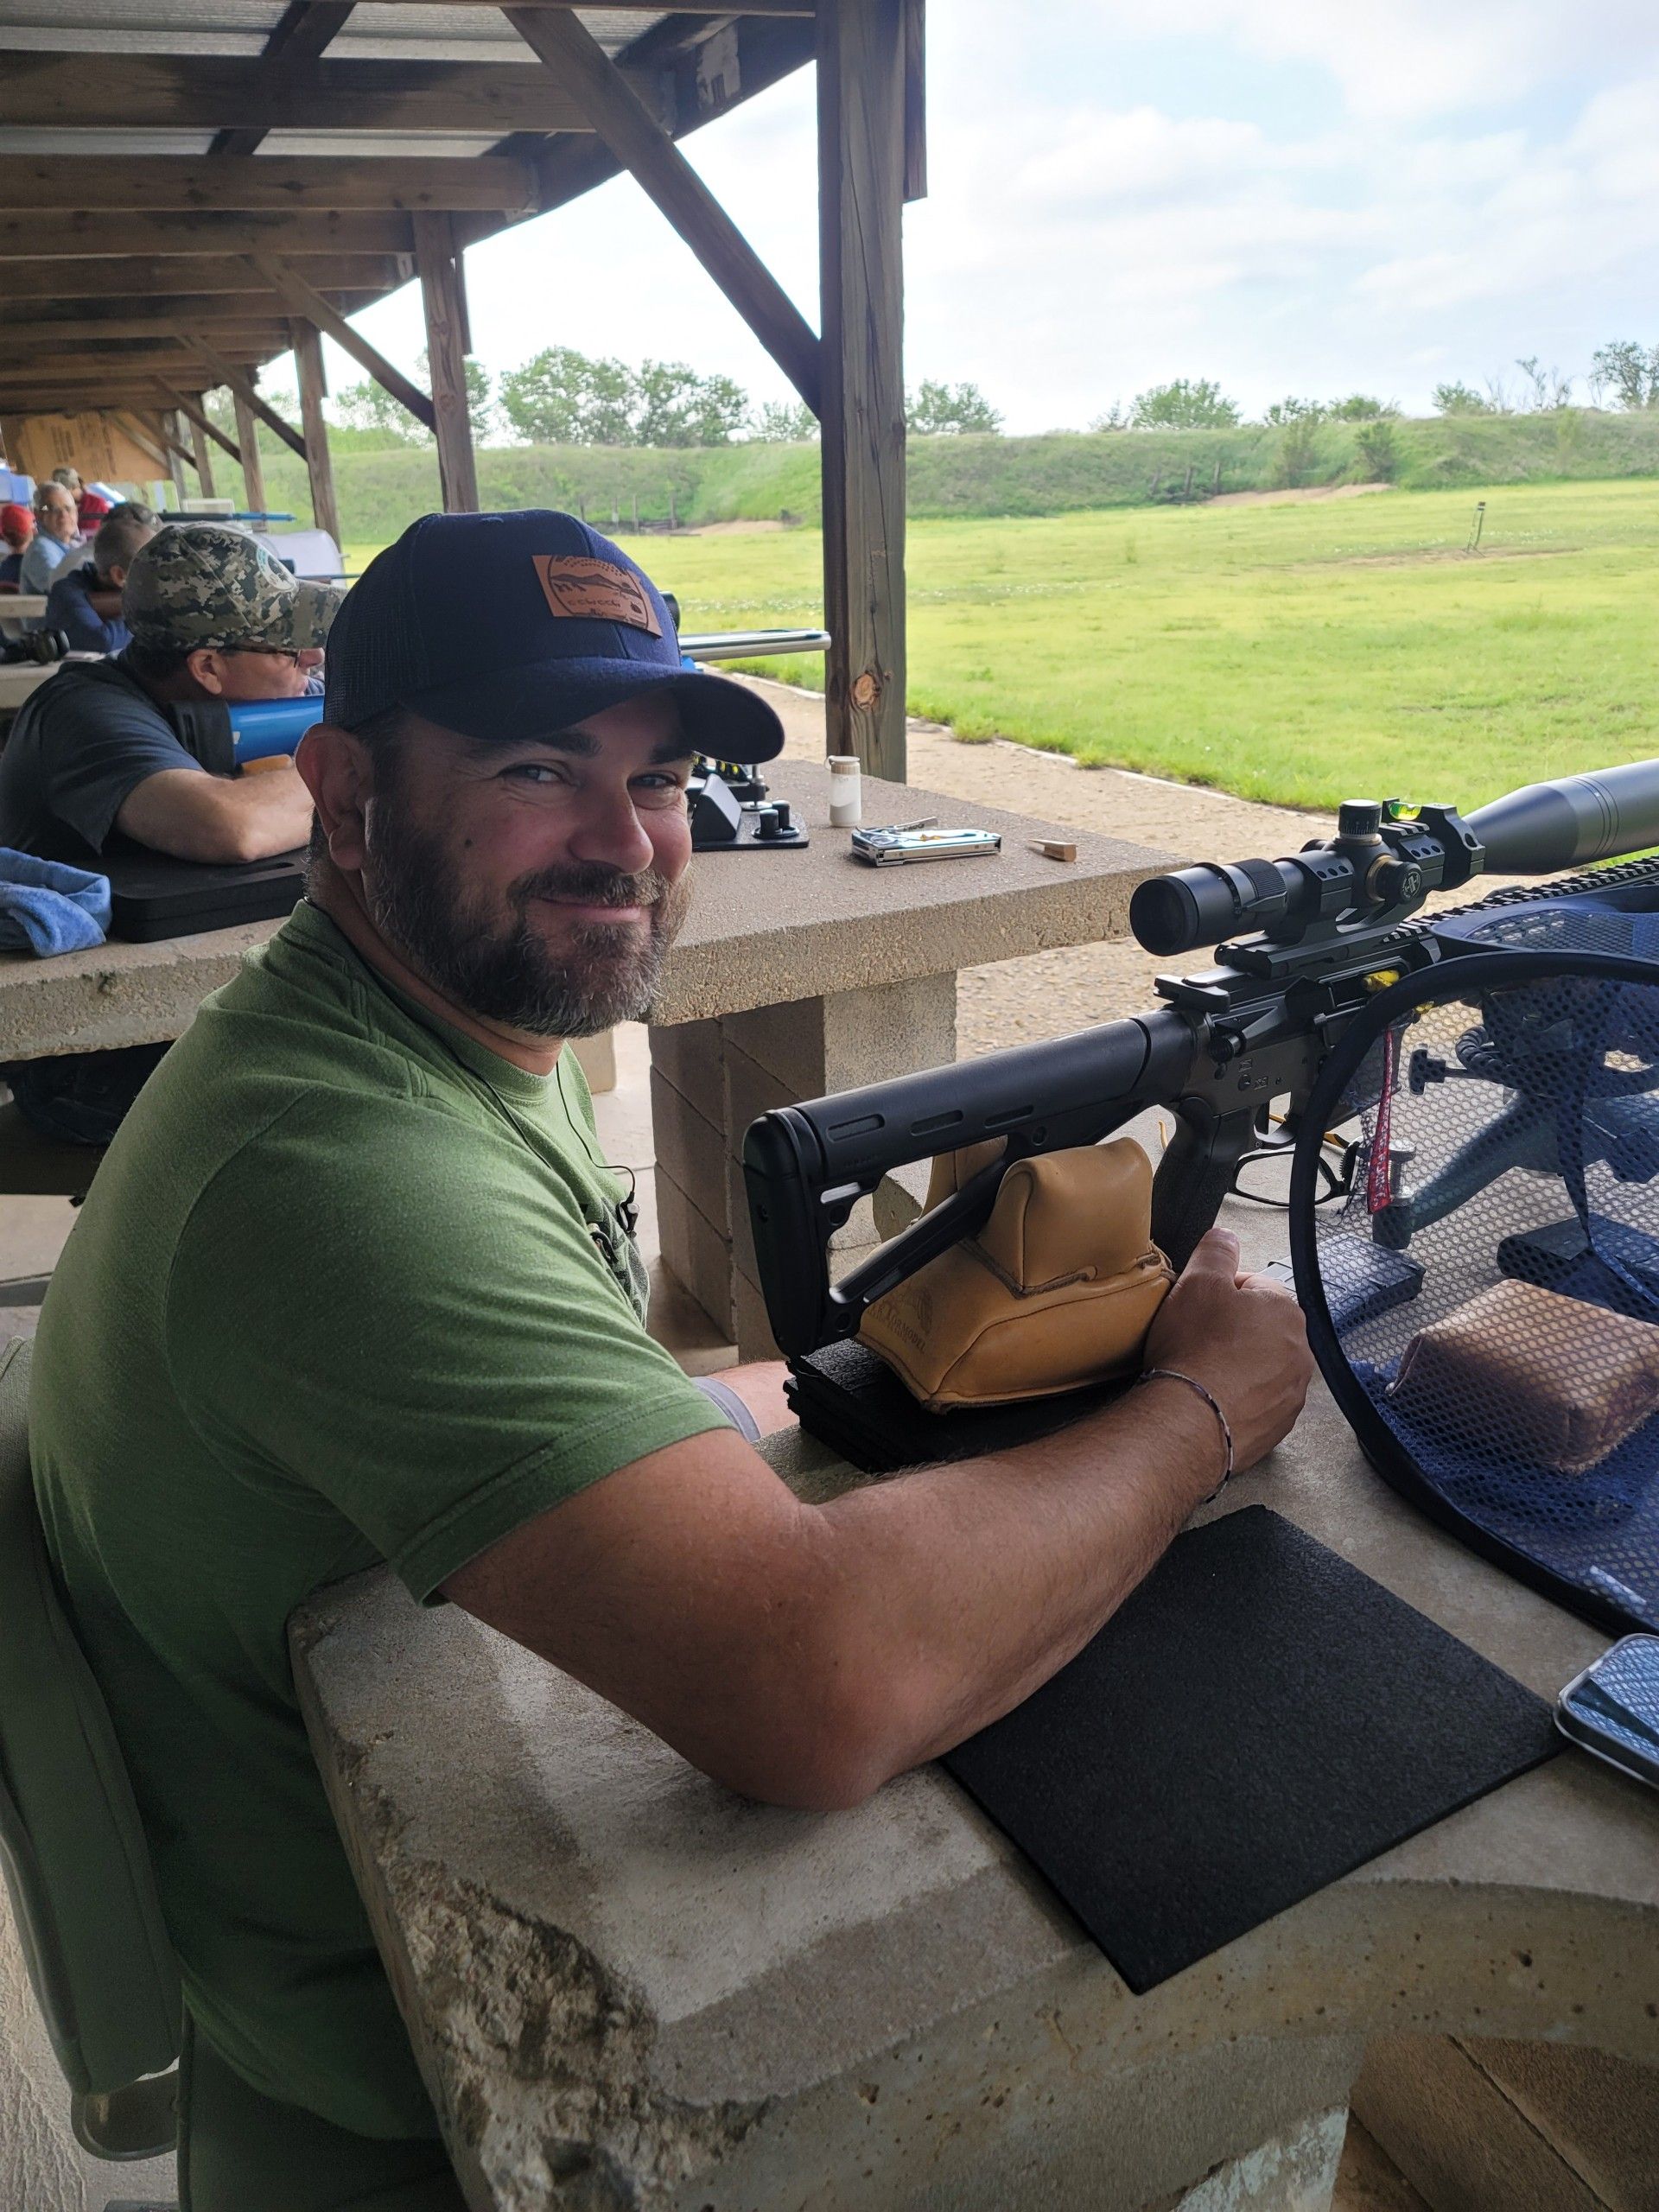 man in green shirt and blue hat smiling while sitting at gun range holding a rifle